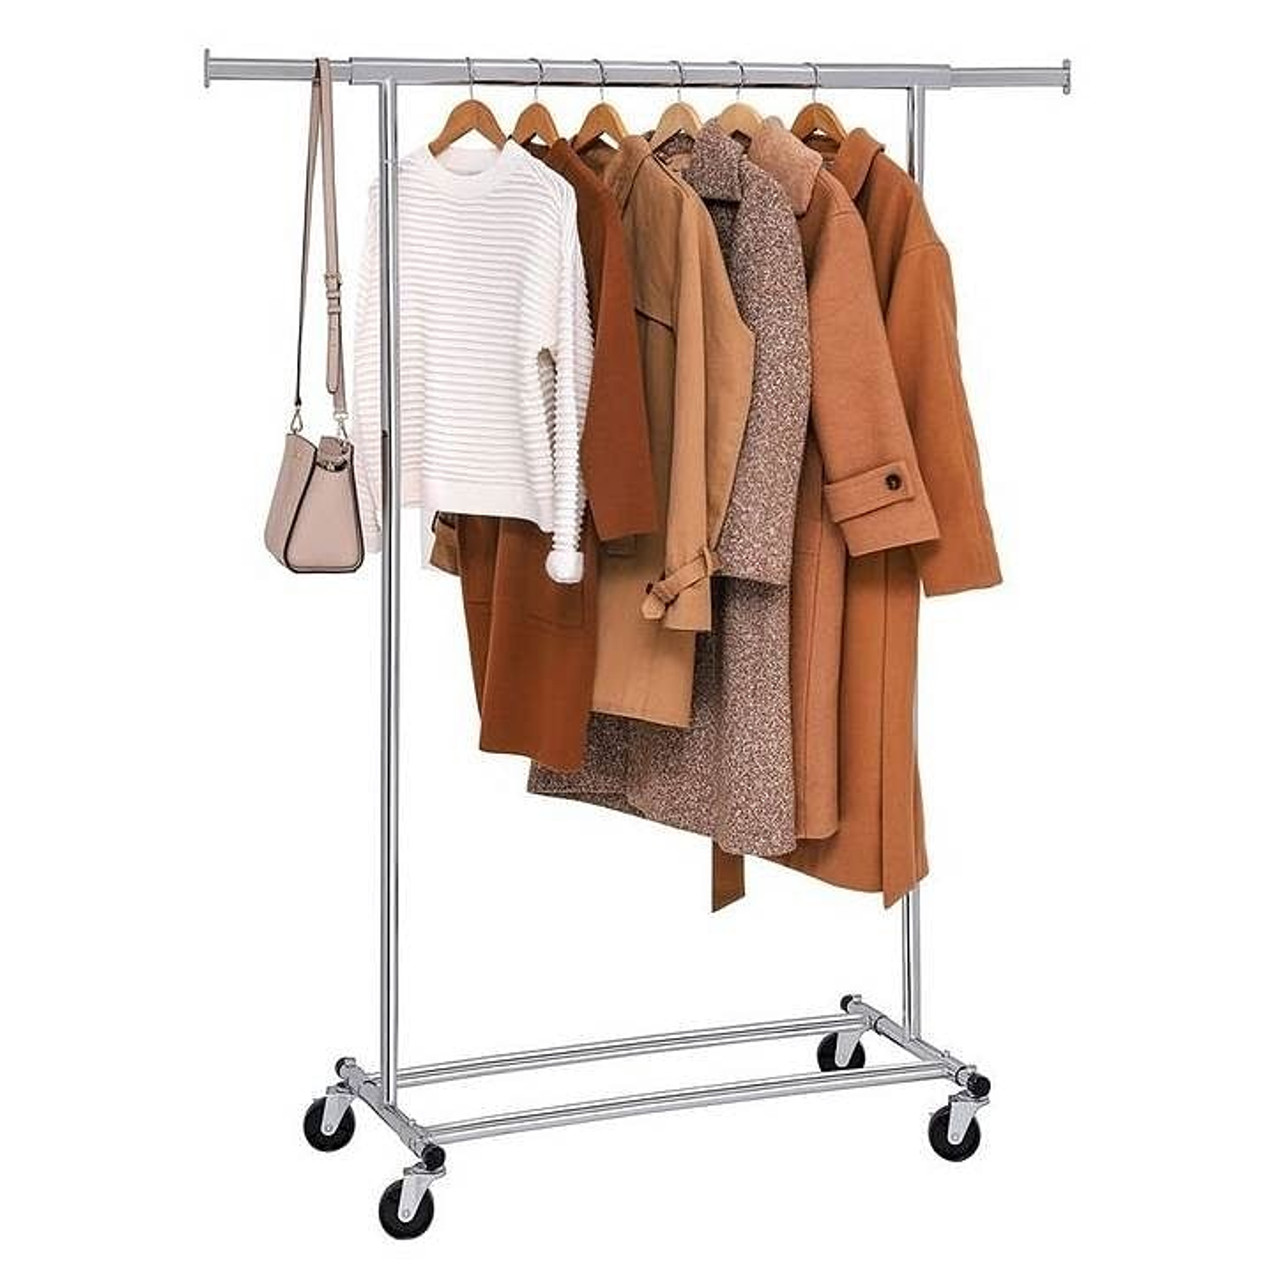 Heavy Duty Chrome Plated Silver Metal Garment Rack Clothes Hanging Bar on Wheels